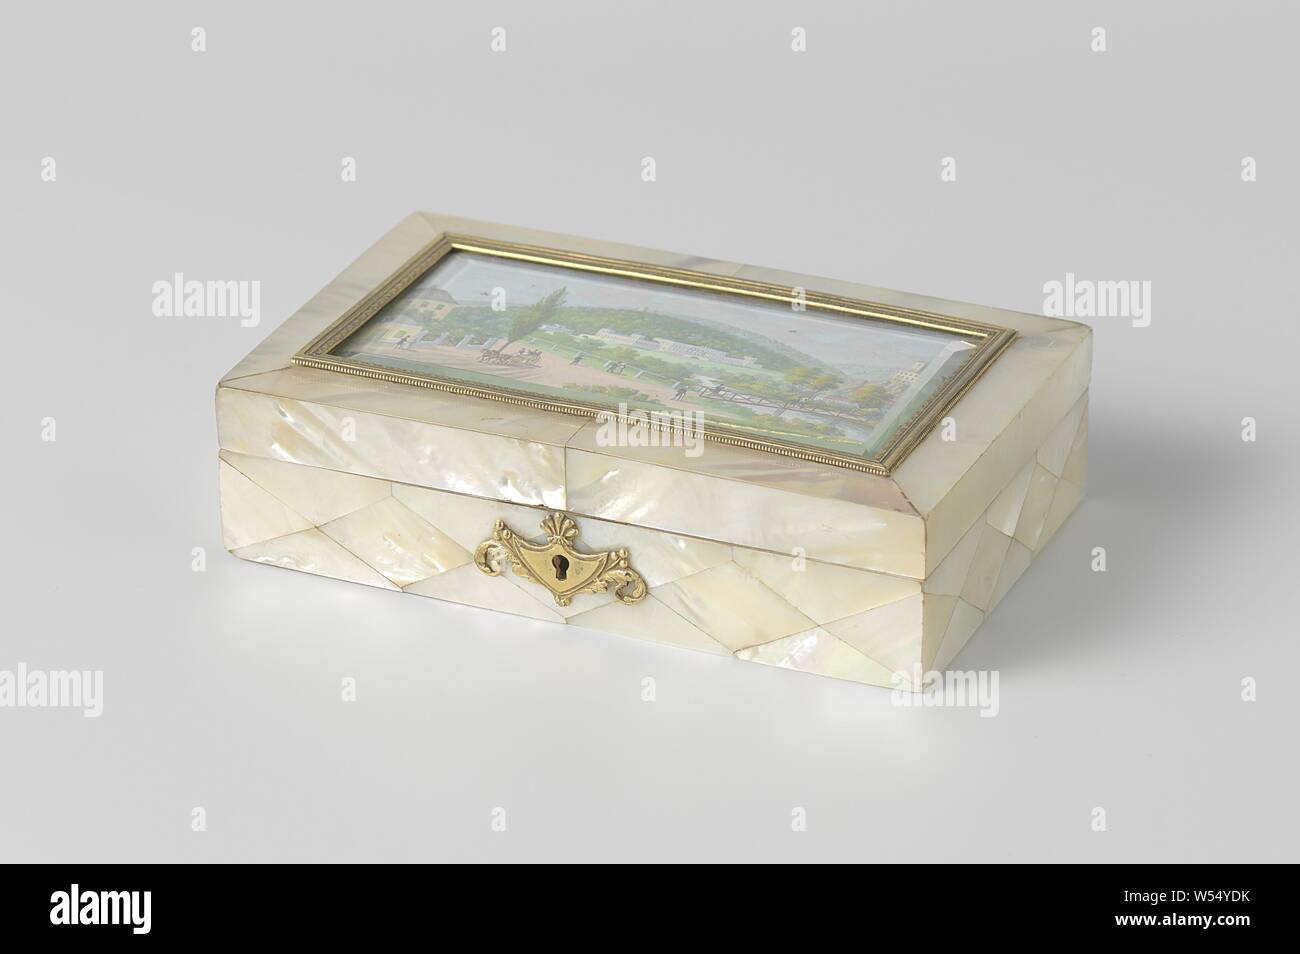 Sewing kit in mother-of-pearl box, Sewing kit in rectangular mother-of-pearl  box, with behind the glass lid a gouache with a cityscape with caption:  Weilburg bey Baden, inside a bobbin, a pair of